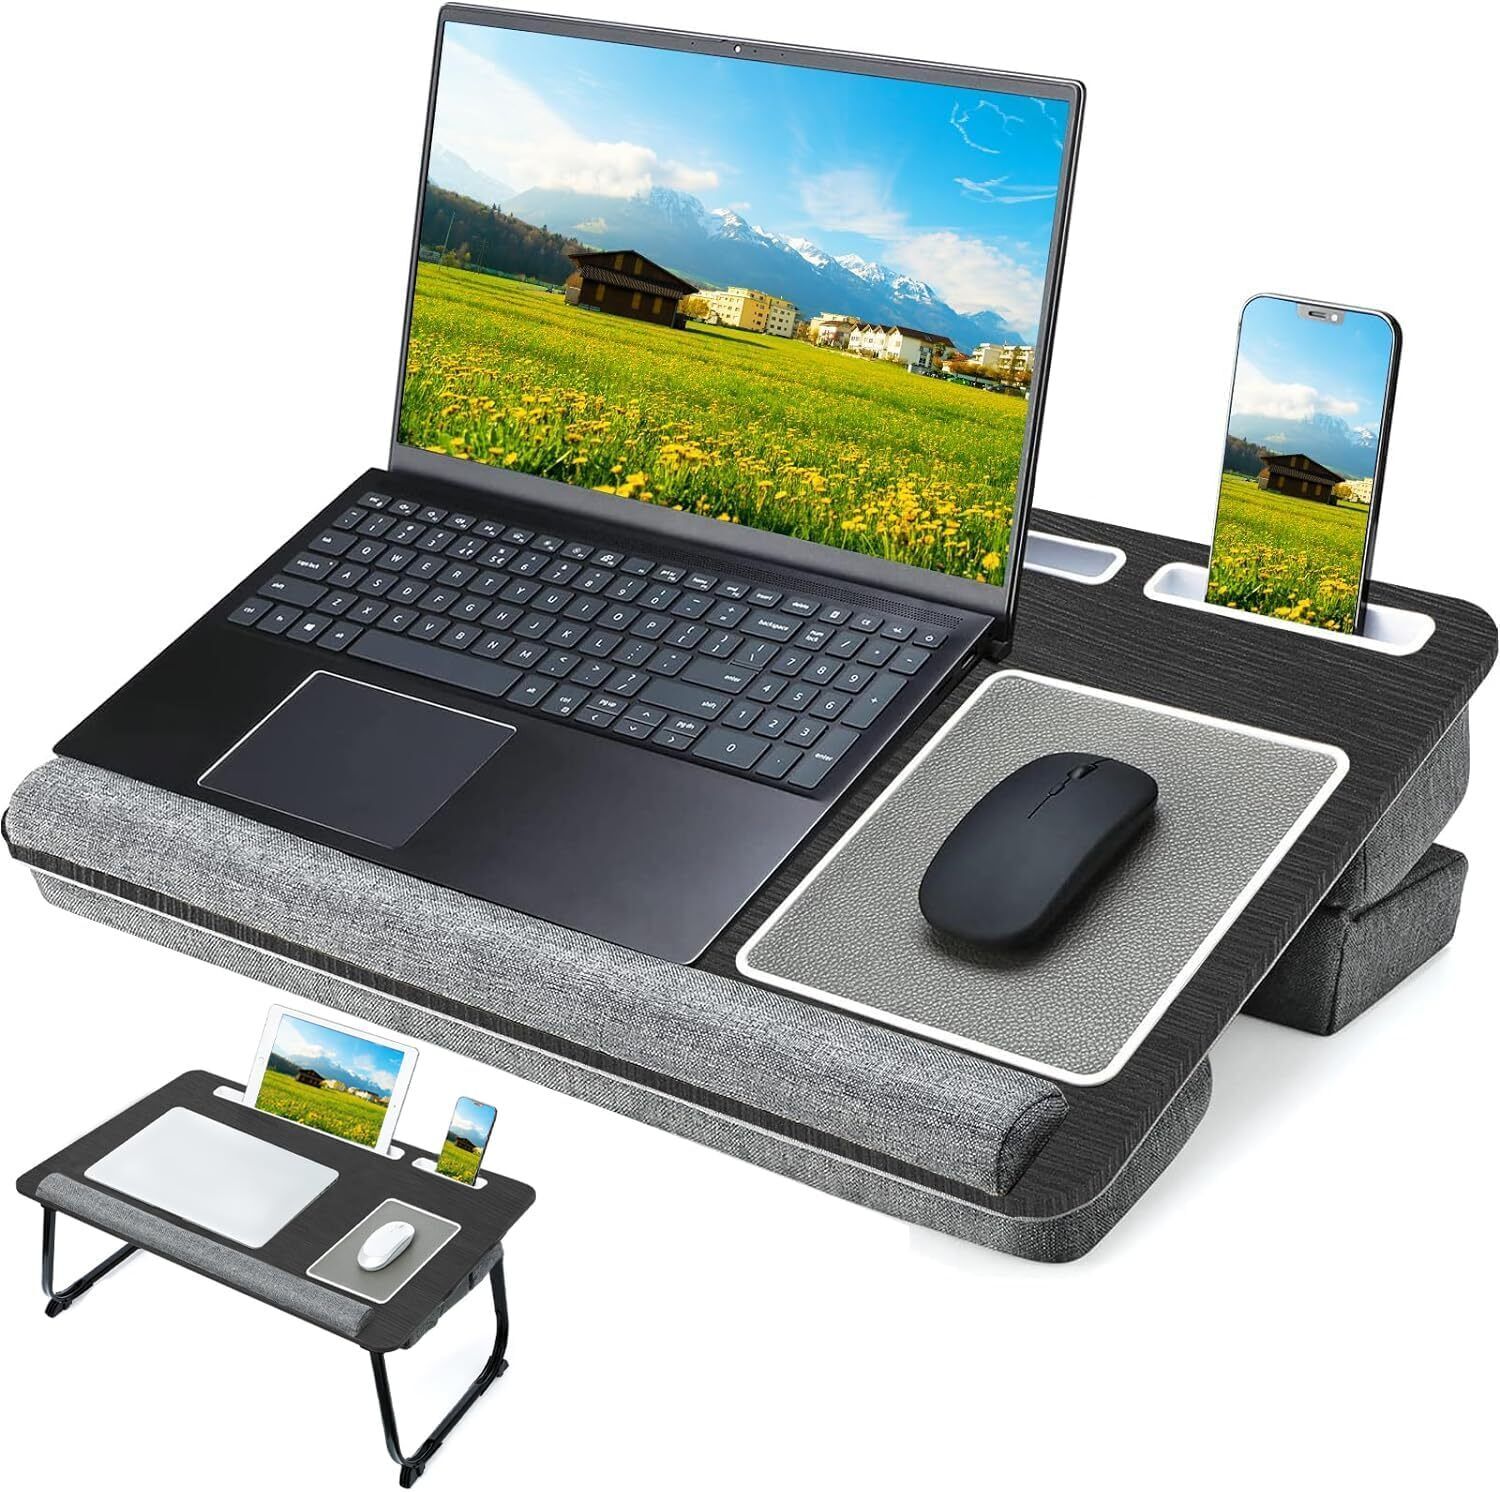 Laptop Desk 2 in 1 Lap Desk with Cushion 17 inch Laptop Folding Table with Pad